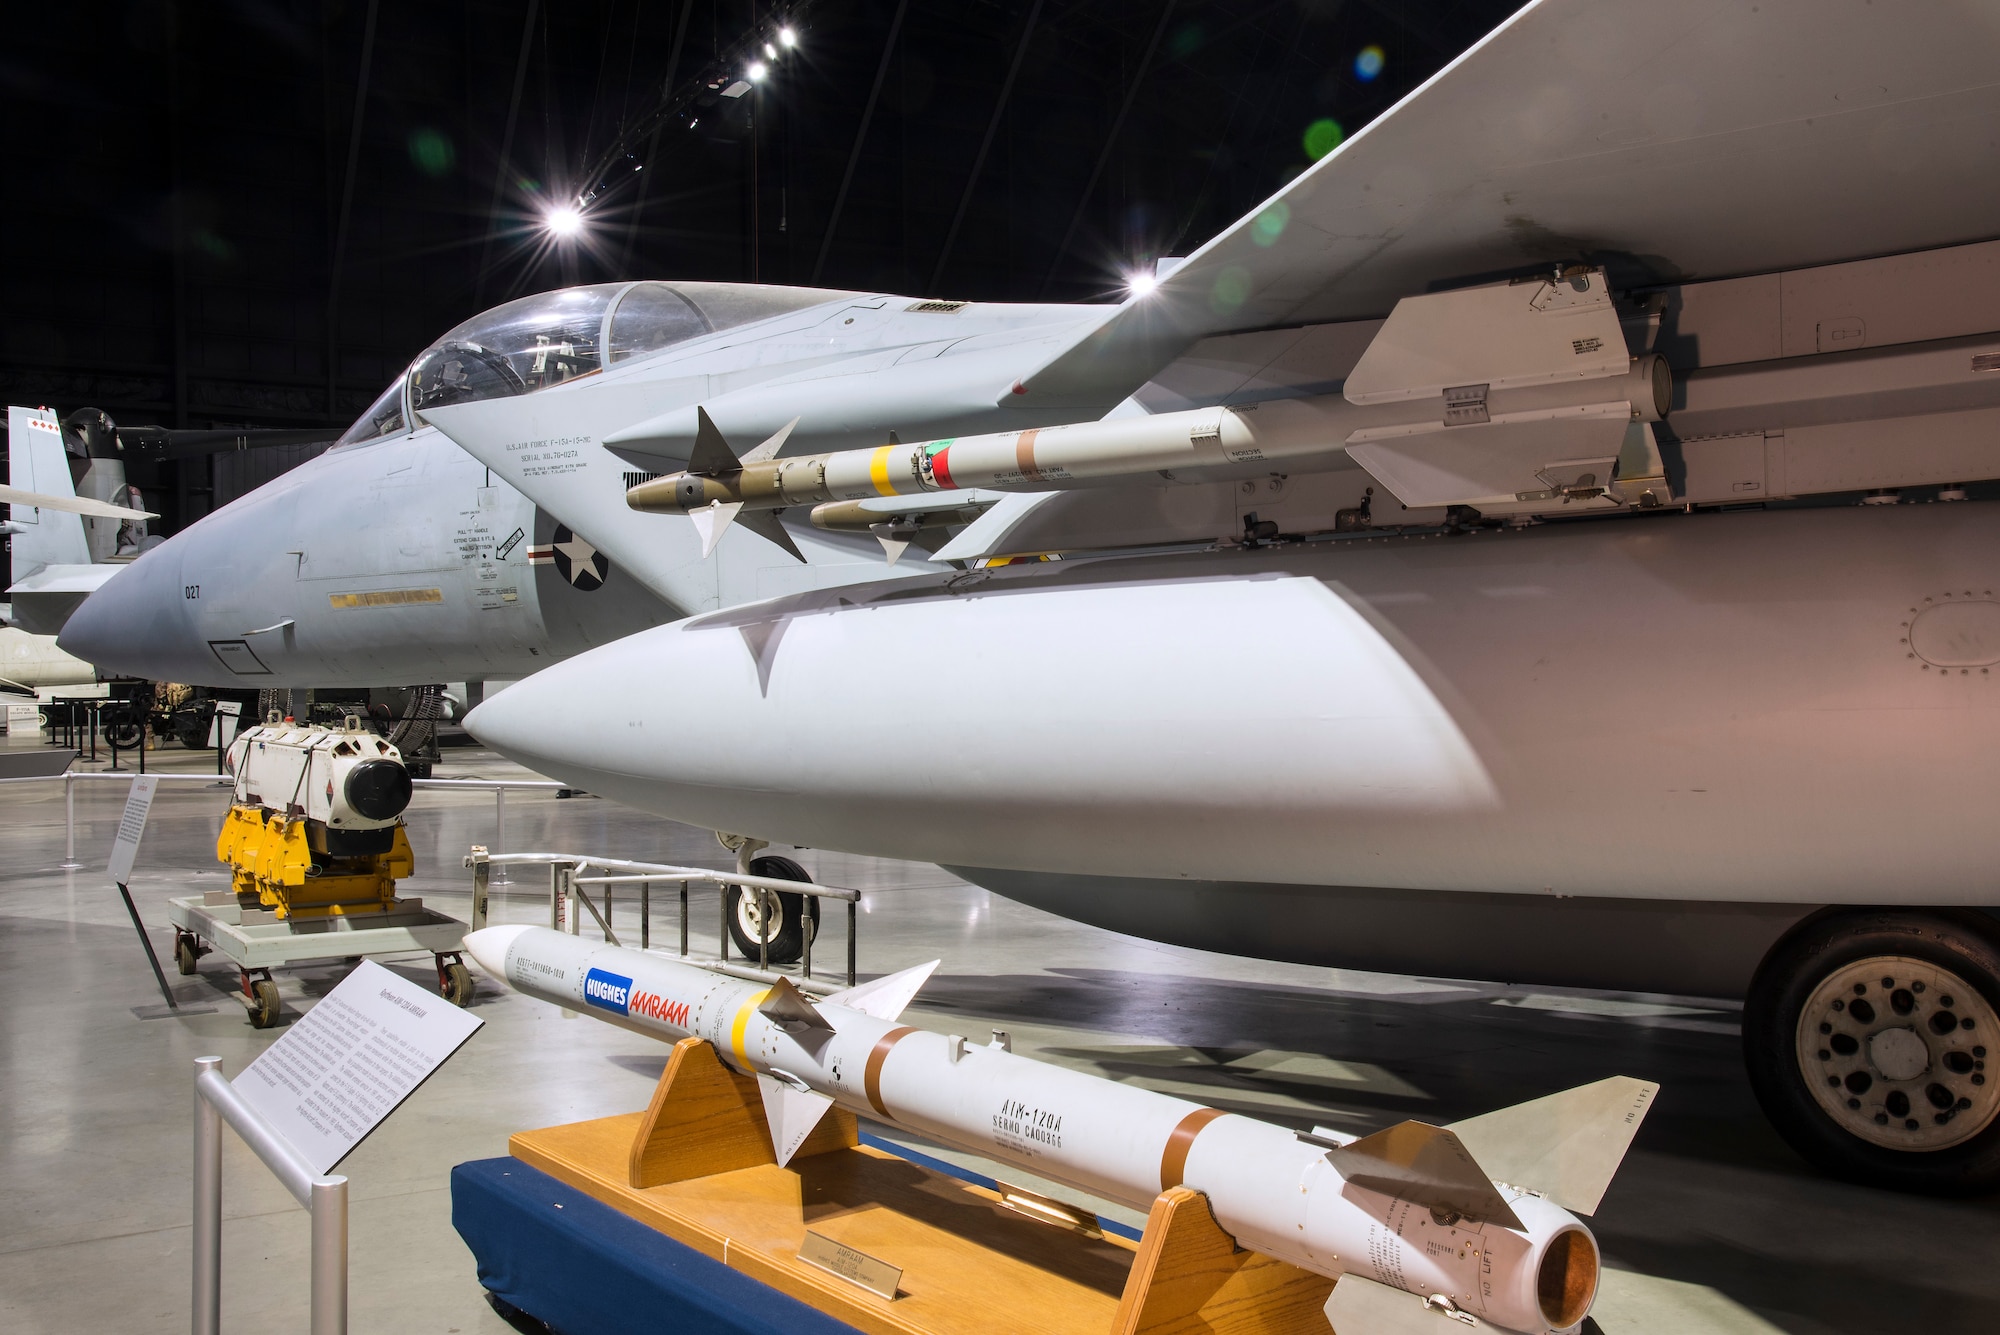 DAYTON, Ohio -- McDonnell Douglas F-15A in the Cold War Gallery at the National Museum of the United States Air Force. (U.S. Air Force photo by Ken LaRock)